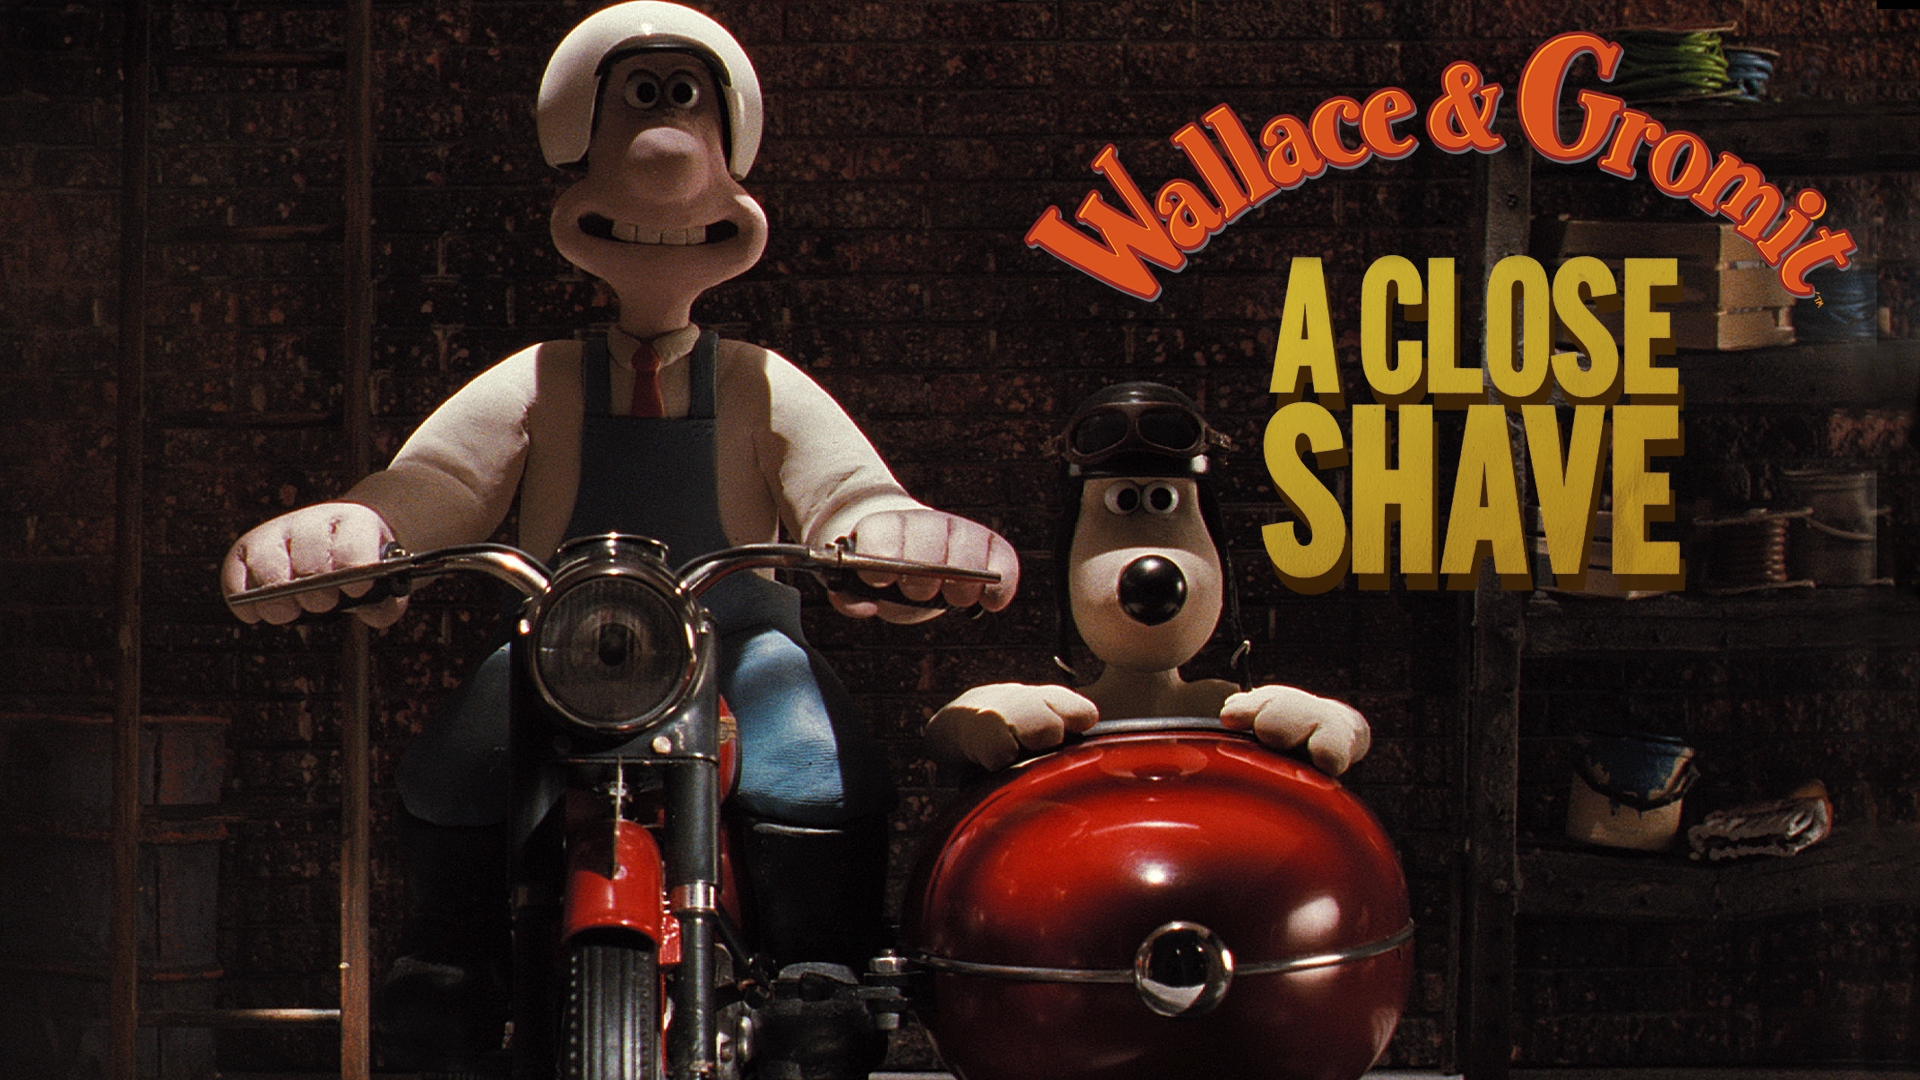 wallace and gromit a close shave